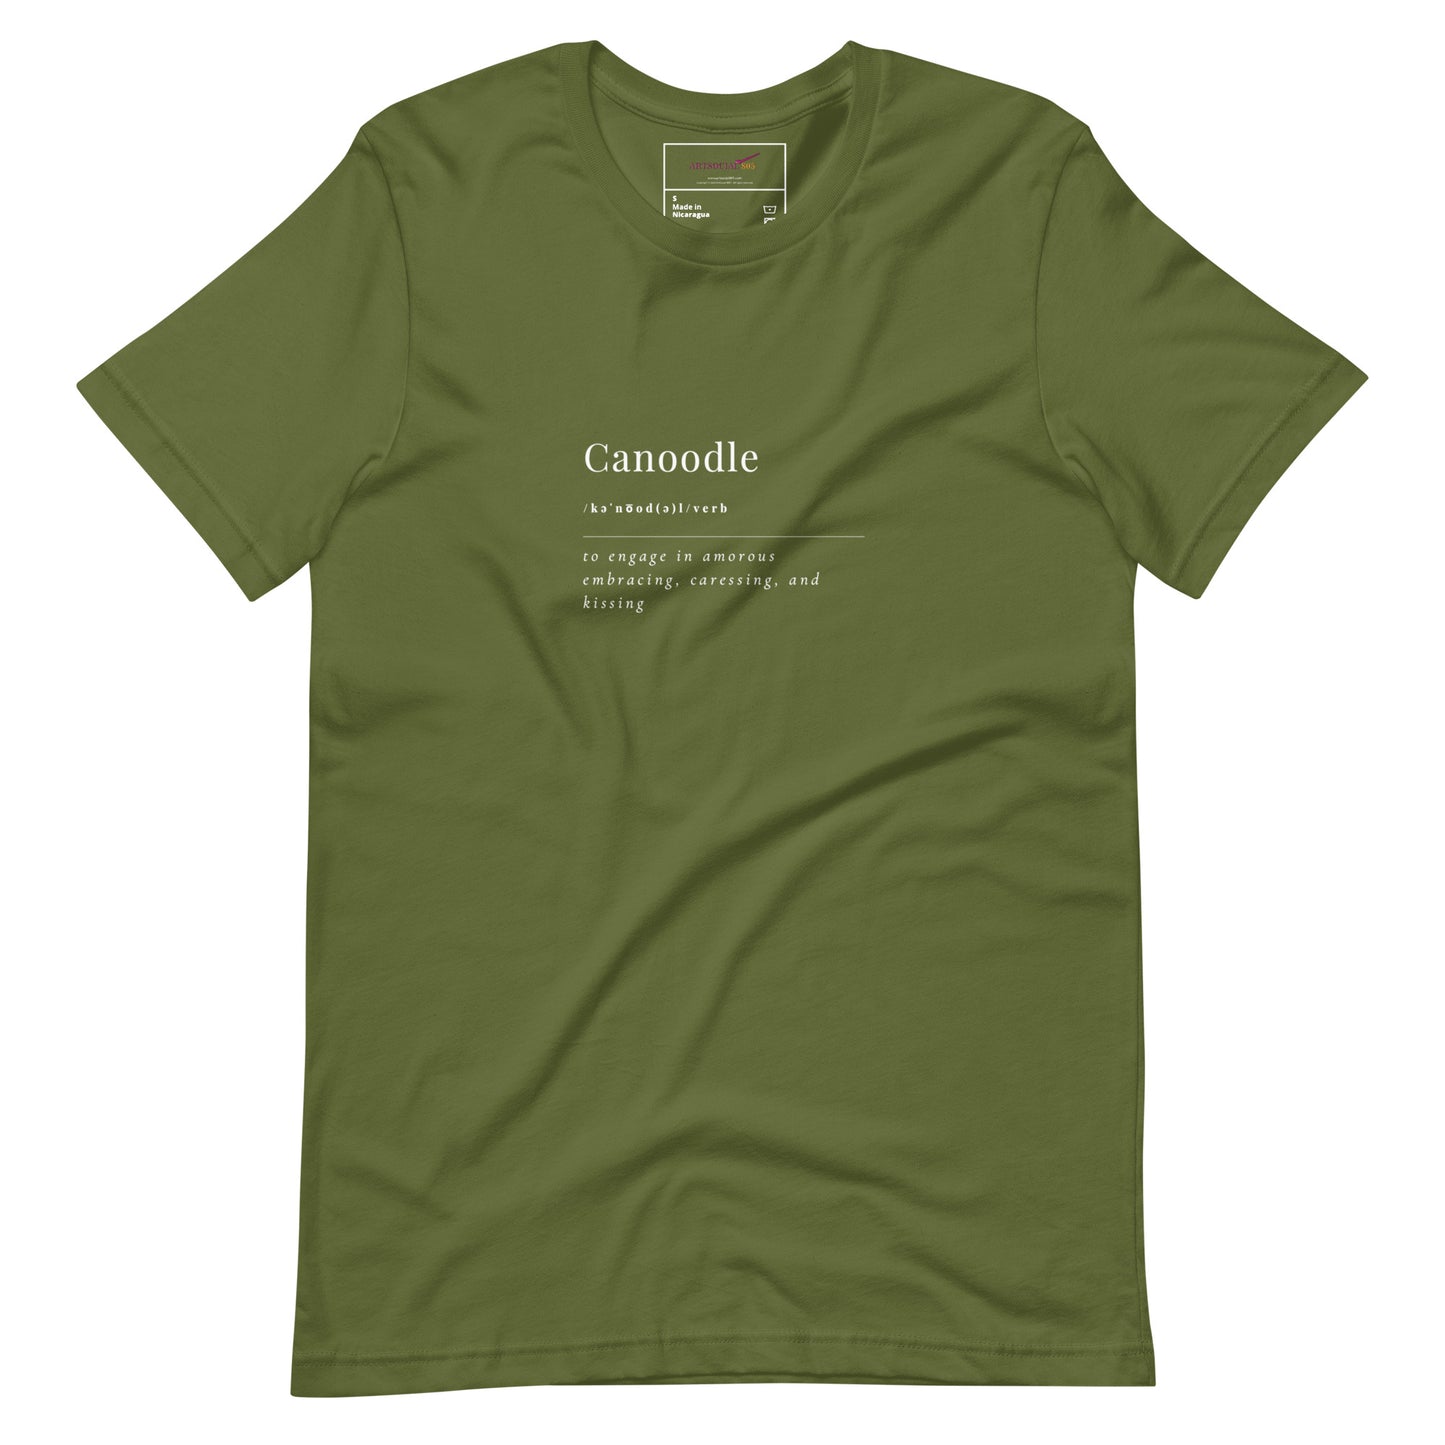 Definition of “Canoodle” T-shirt